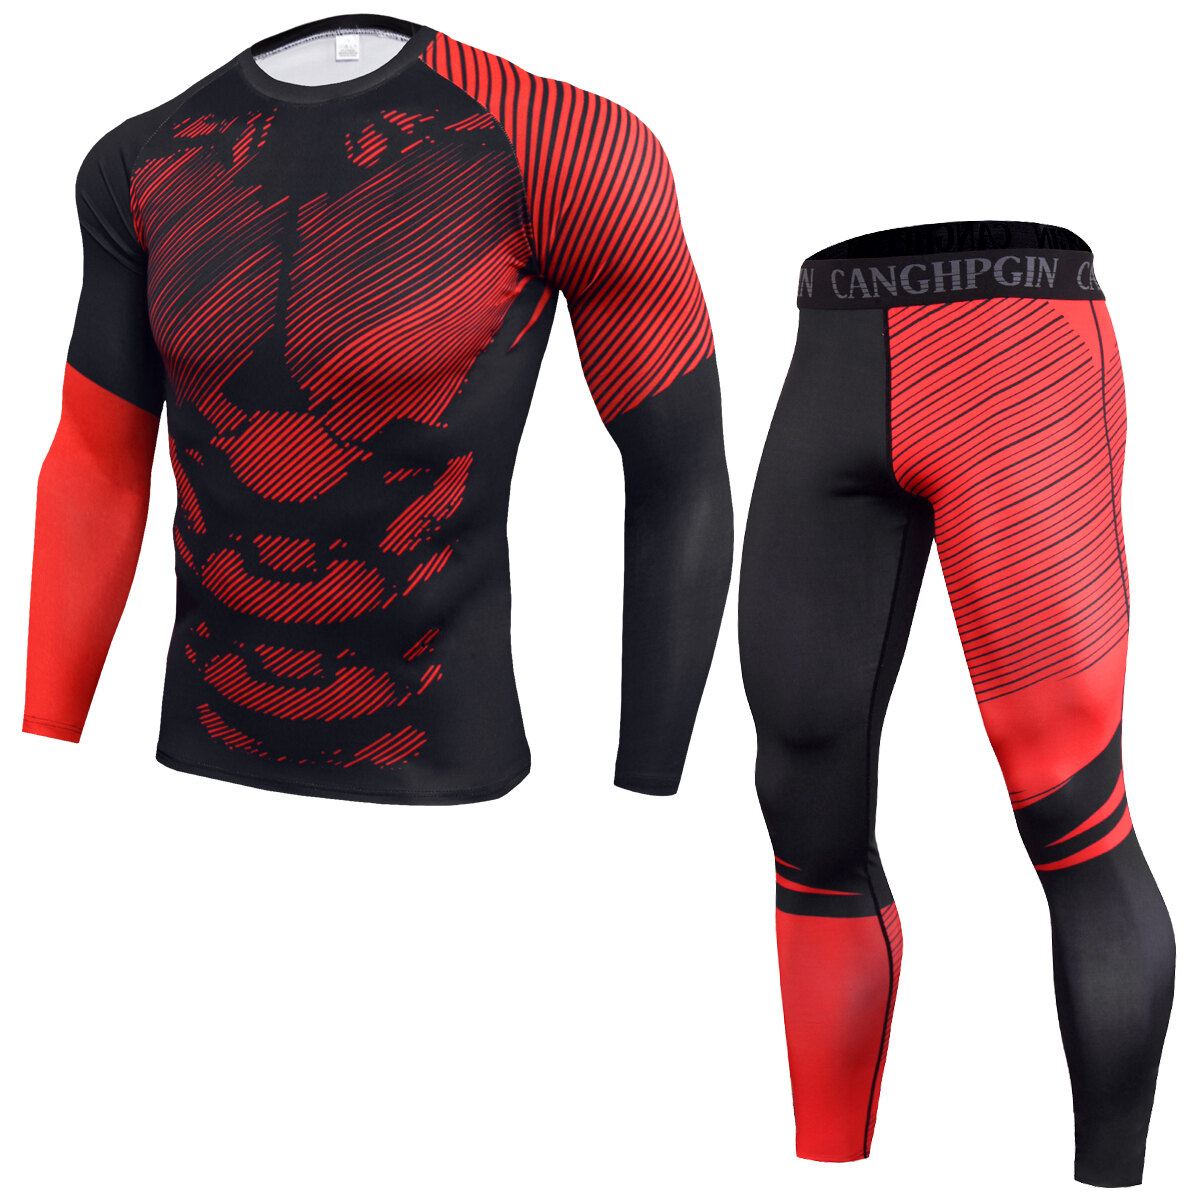 Men's Long Sleeve Muscle Fit Gym T Shirts Tight Legging Red - PKAWAY